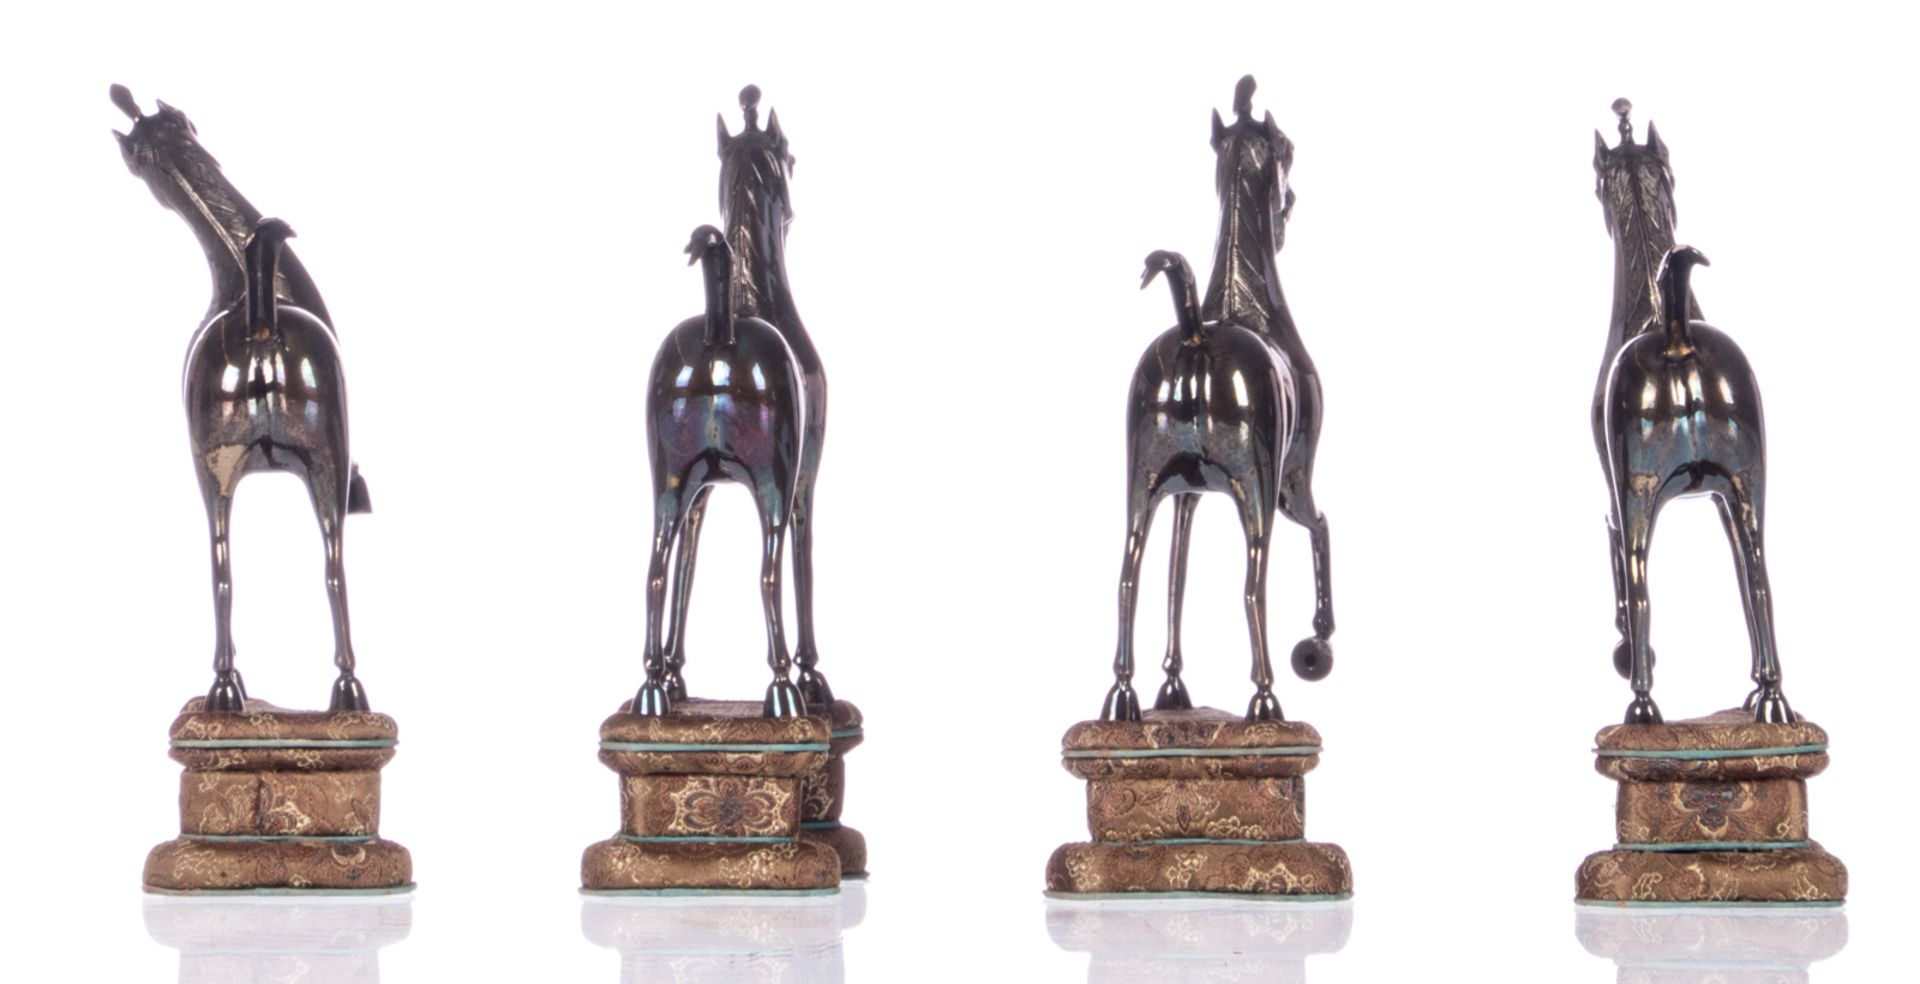 Four Chinese sterling silver horses, standing on a textile covered base, 20thC, H horses 11,4 - H - Image 4 of 6